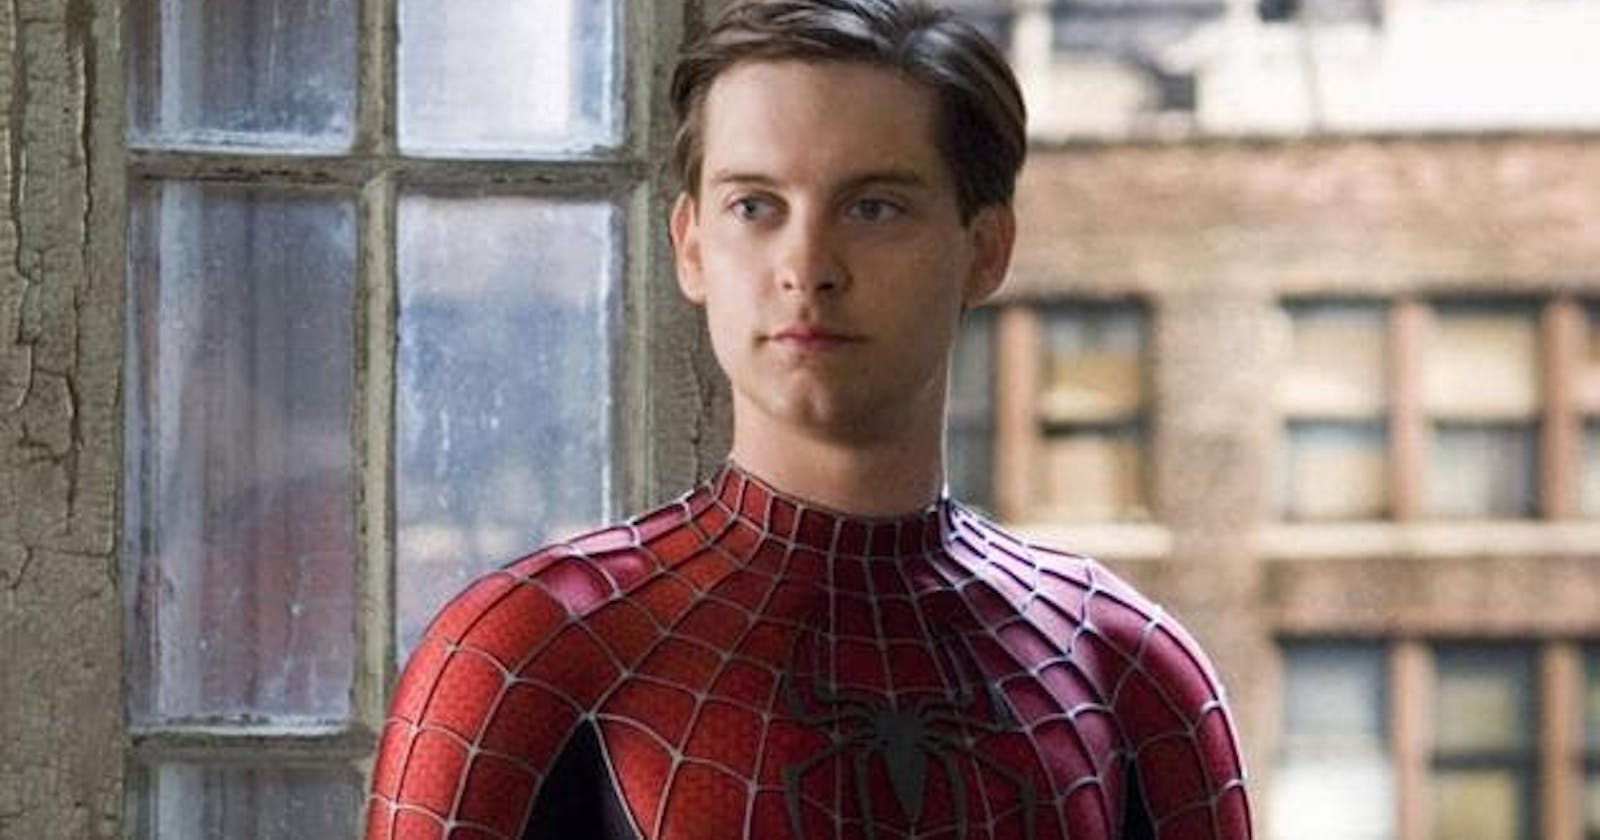 Find Out How Old Is Tobey Maguire?